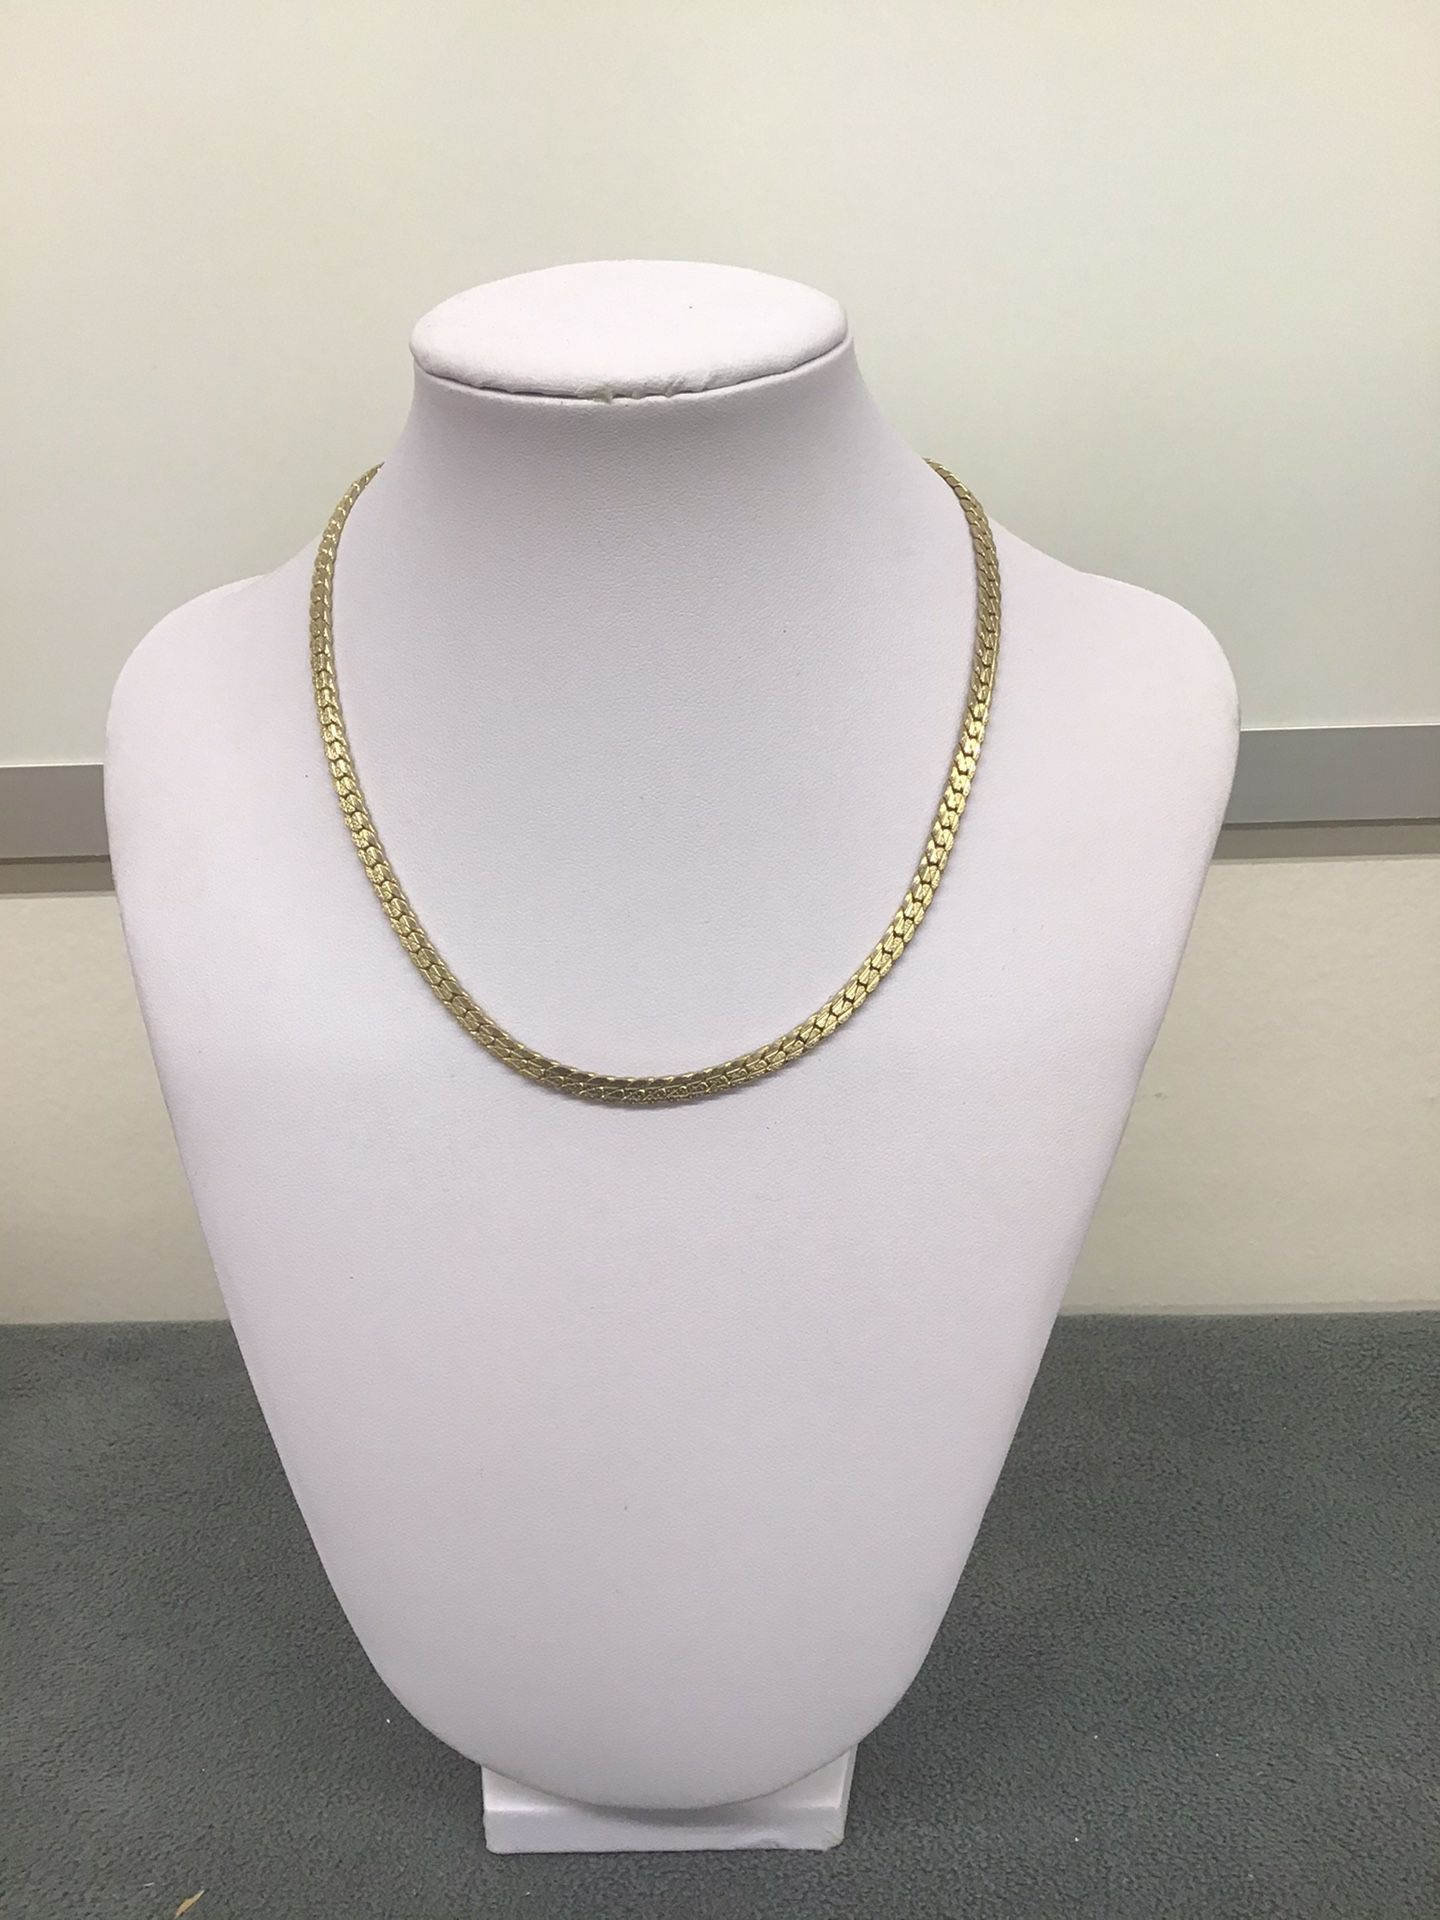 Small gold chain